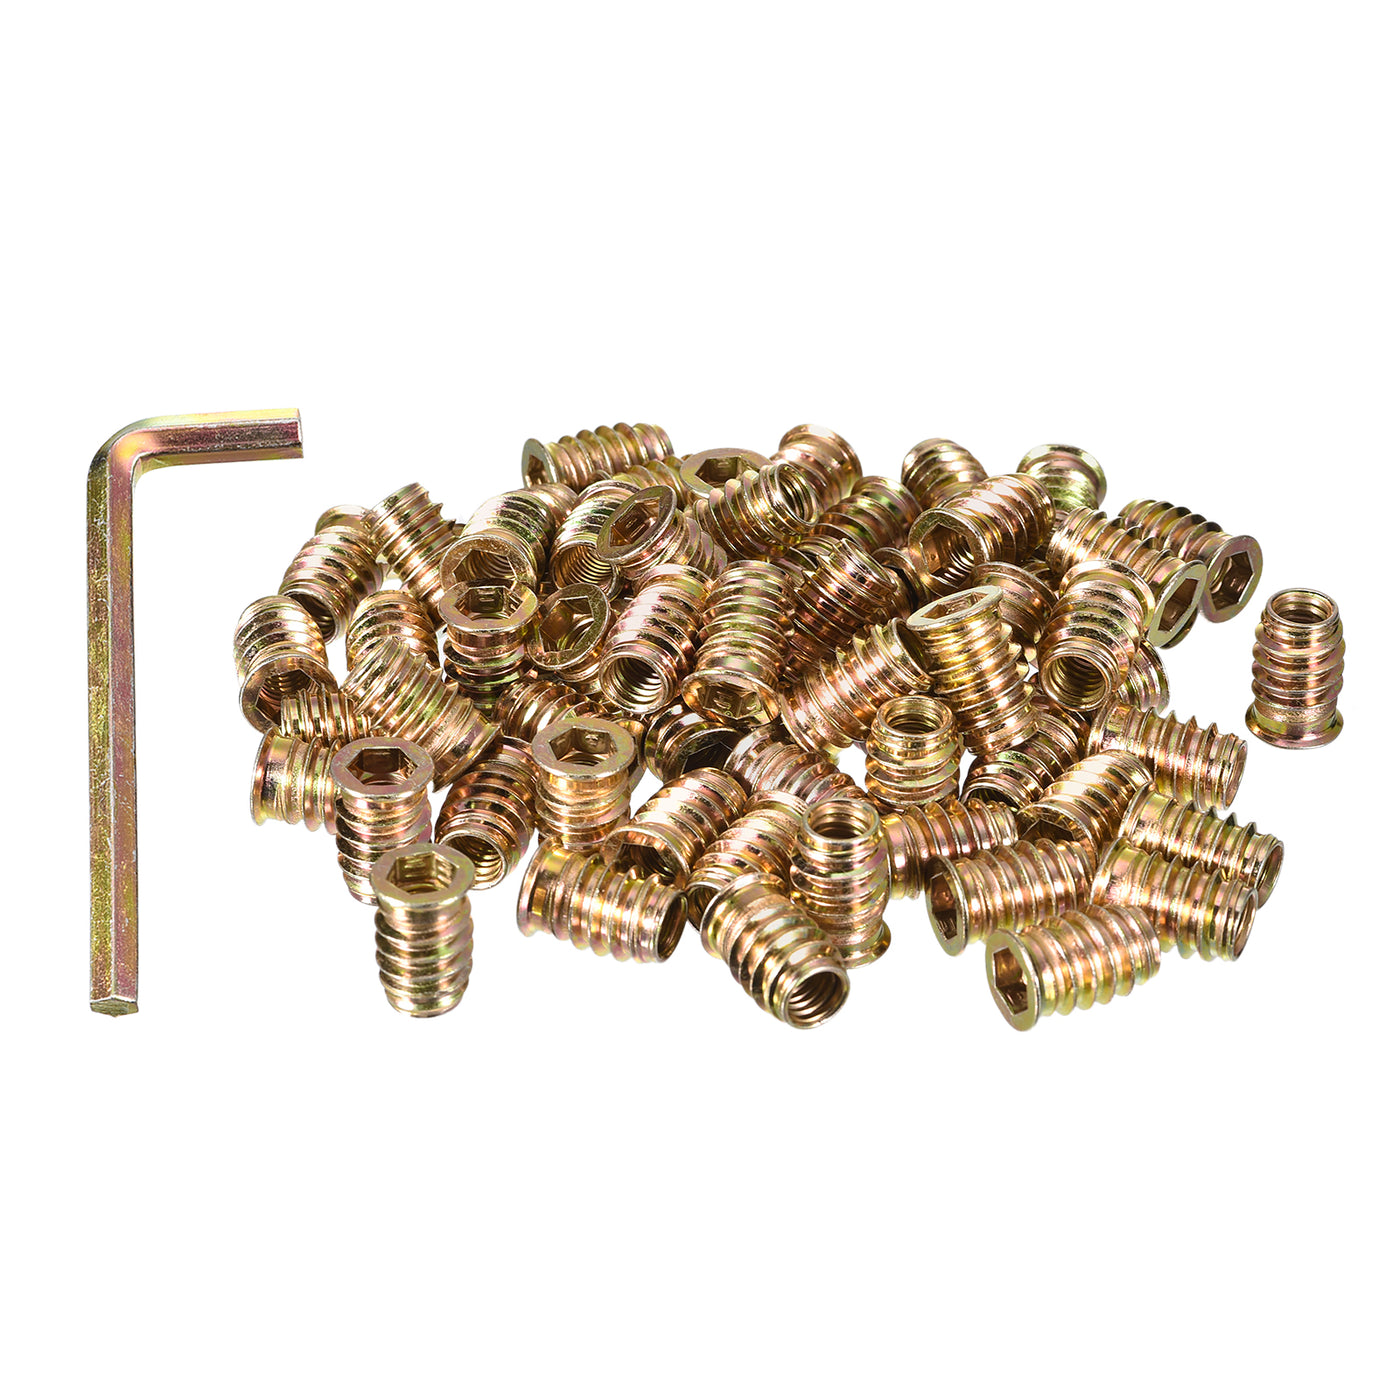 uxcell Uxcell Threaded Inserts Nuts Threaded Inserts for Wood Furniture, Wood Insert Nuts with Hex Wrench